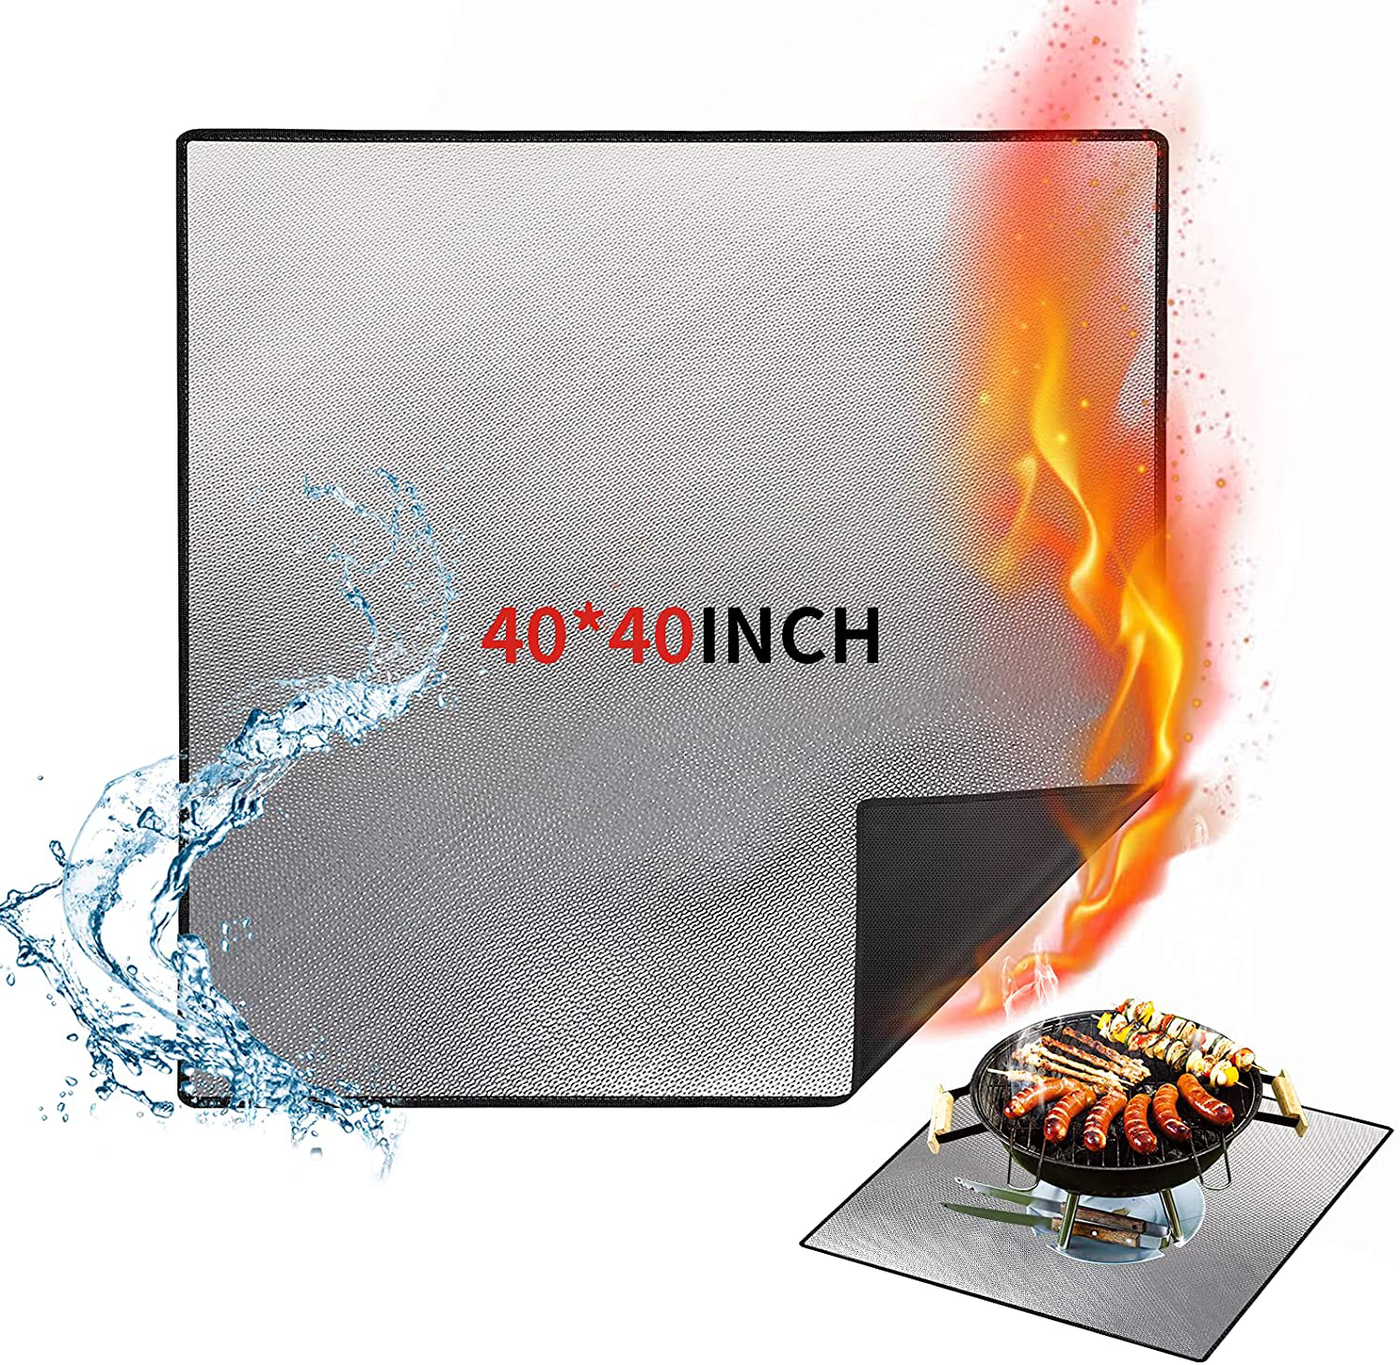 36" Diameter Round Fireproof Mat Fire Pit Mat Grill Mat,DocSafe 3 Layers Fire Pit Pad for Patio, Deck, Grass, Lawn, Heat Shield, Fire Resistant Pad for Outdoor, Fire Pit Accessories,Easy to Clean